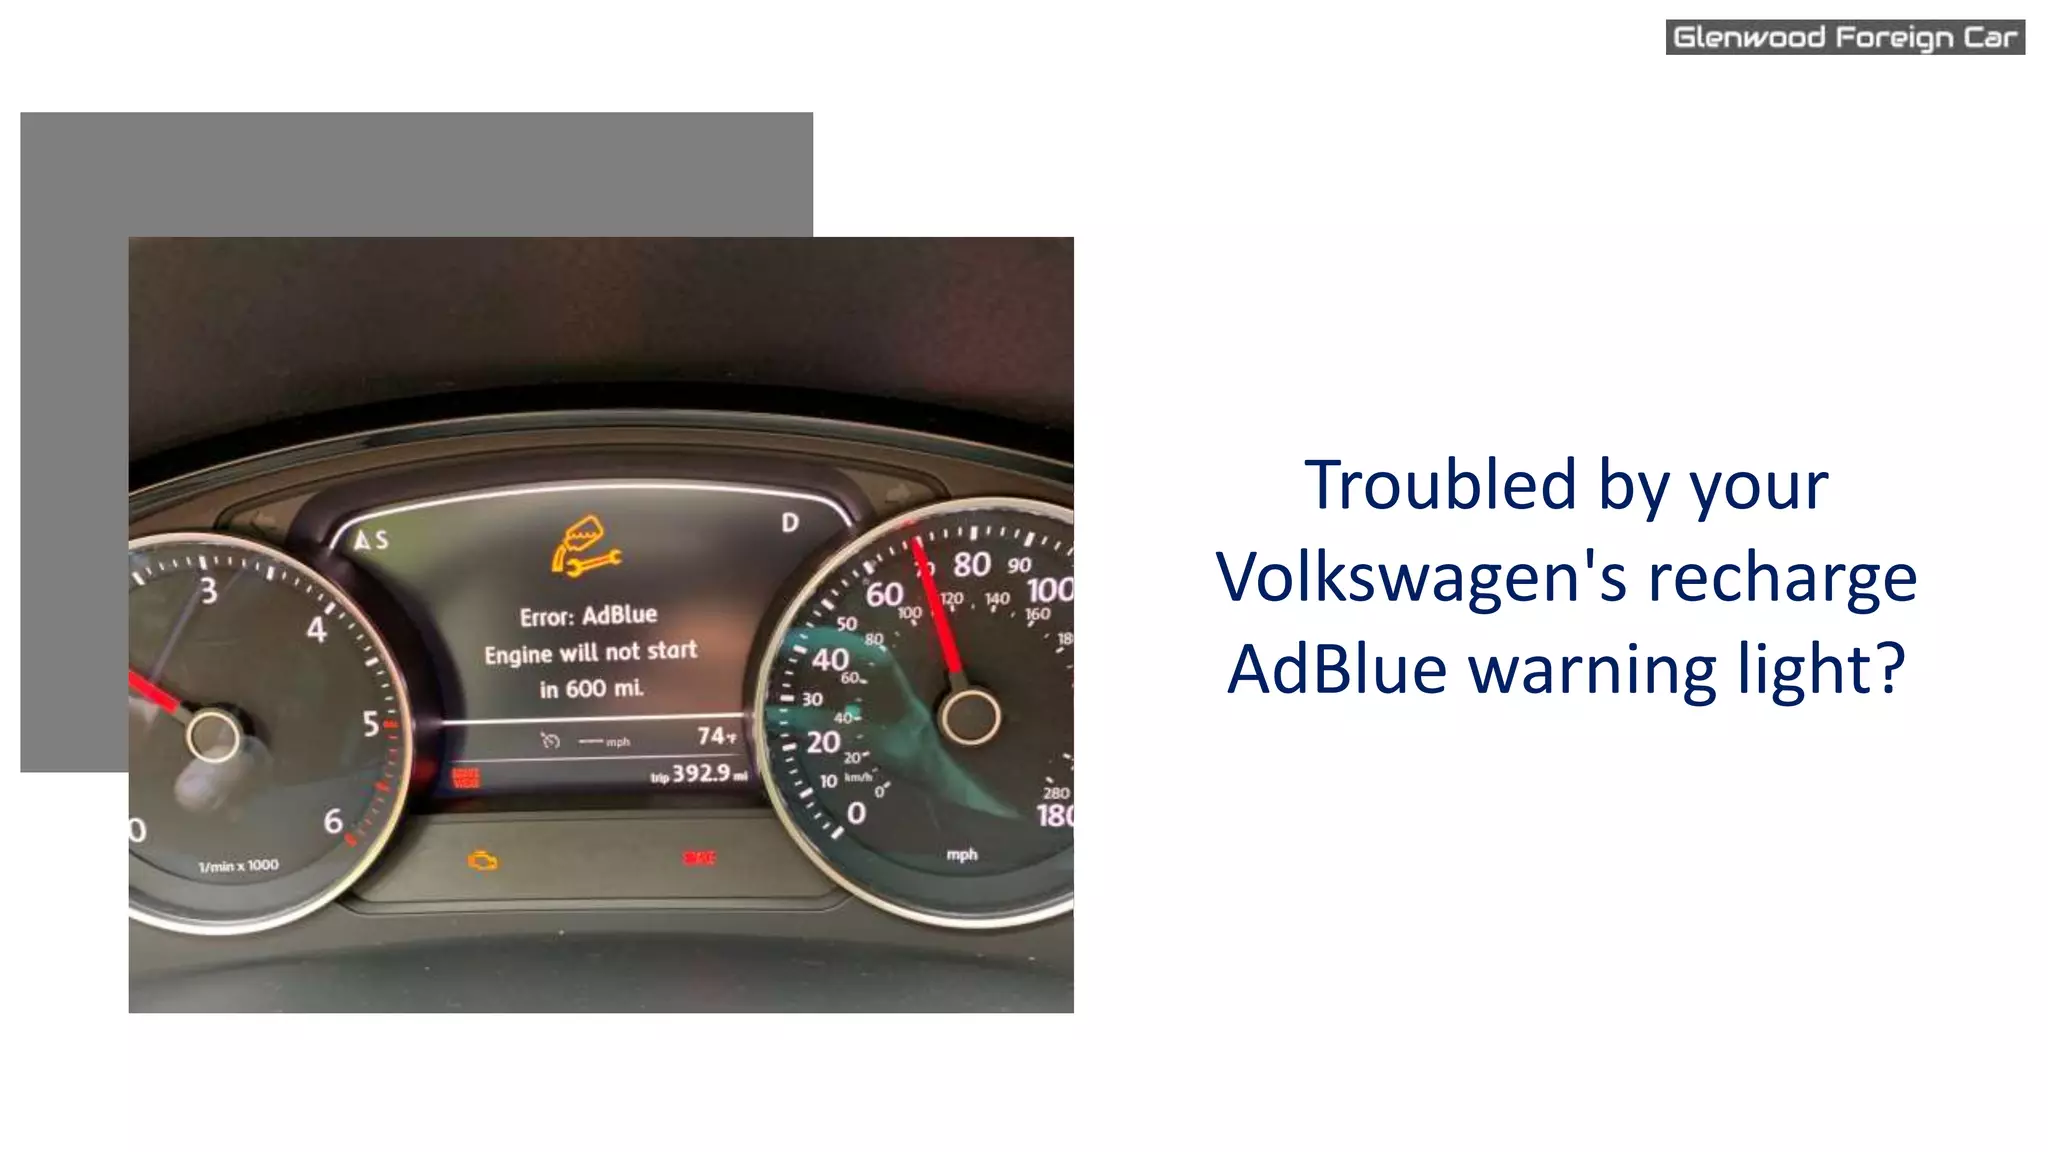 Can I Drive My VW With Warning Light How Can I Reset It